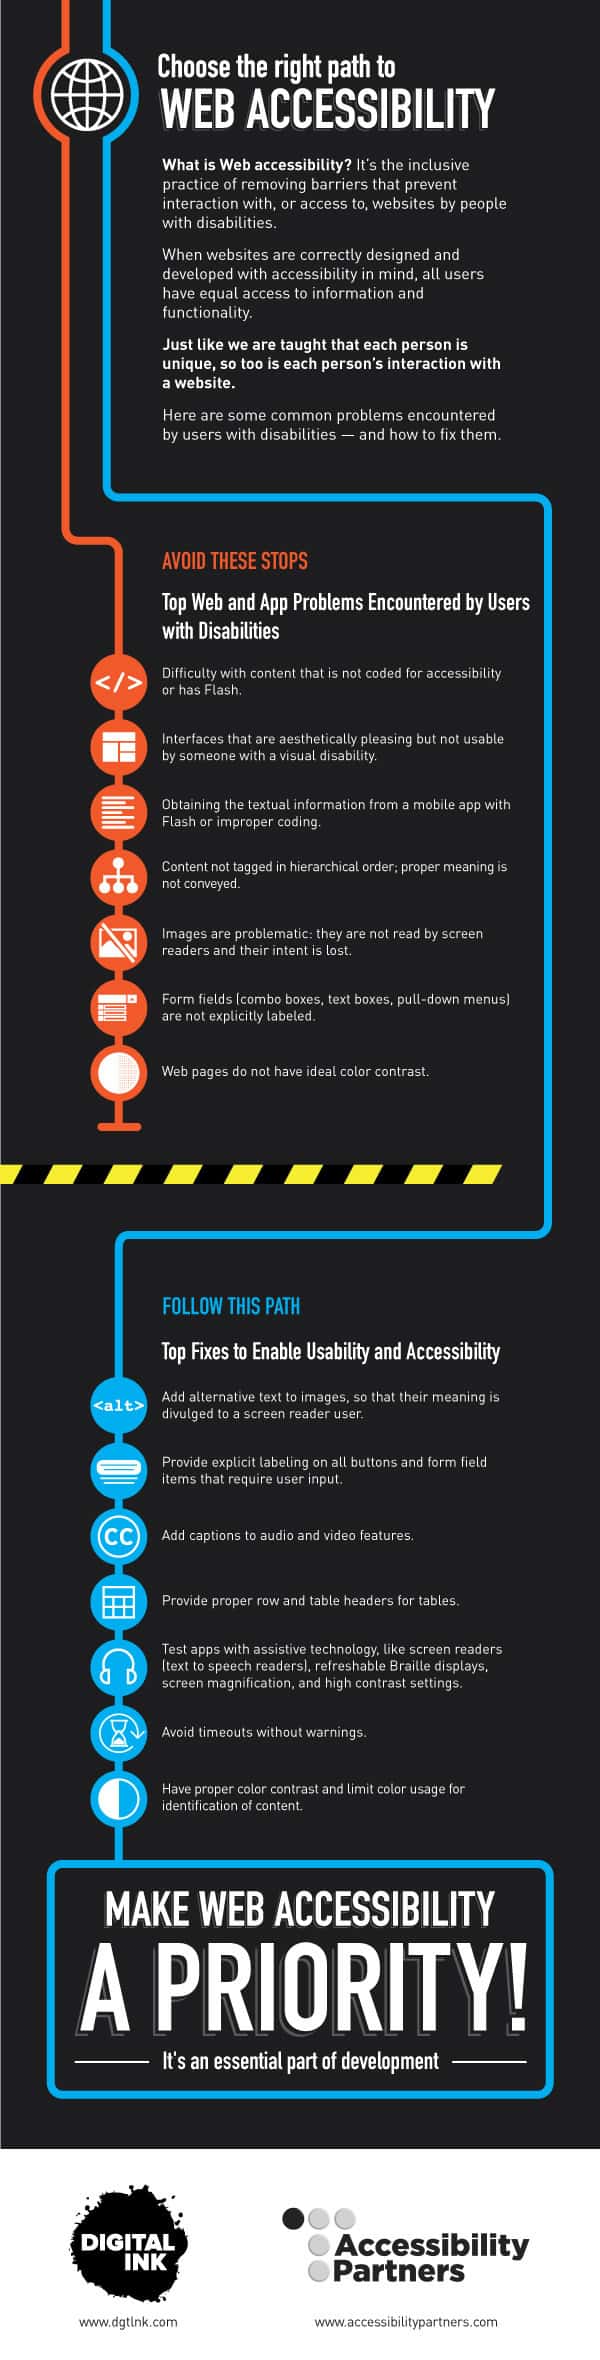 Web Accessibility Infographic by Digital Ink